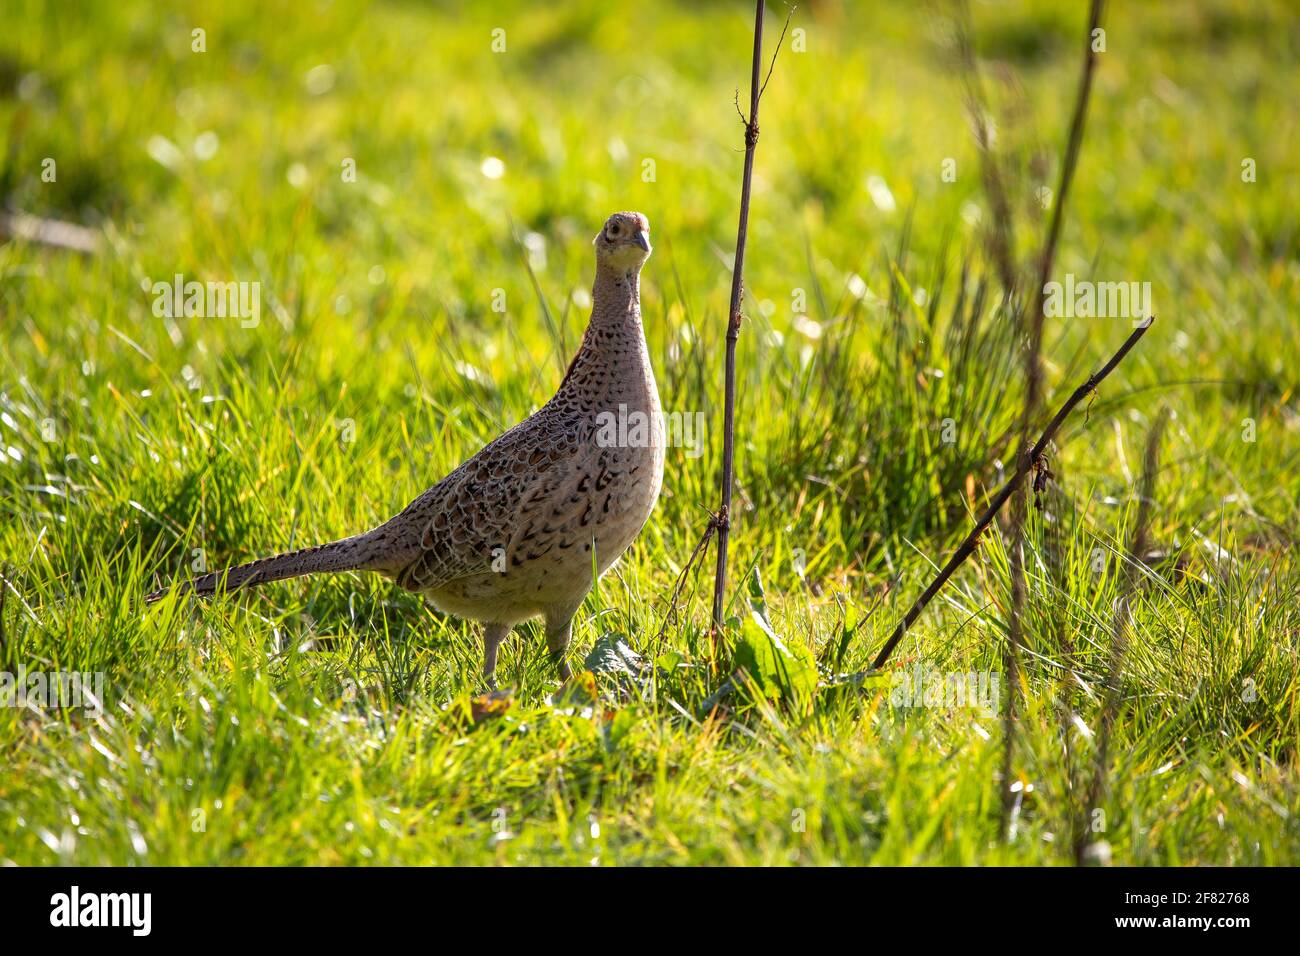 A Female pheasant standing in a green meadow Stock Photo